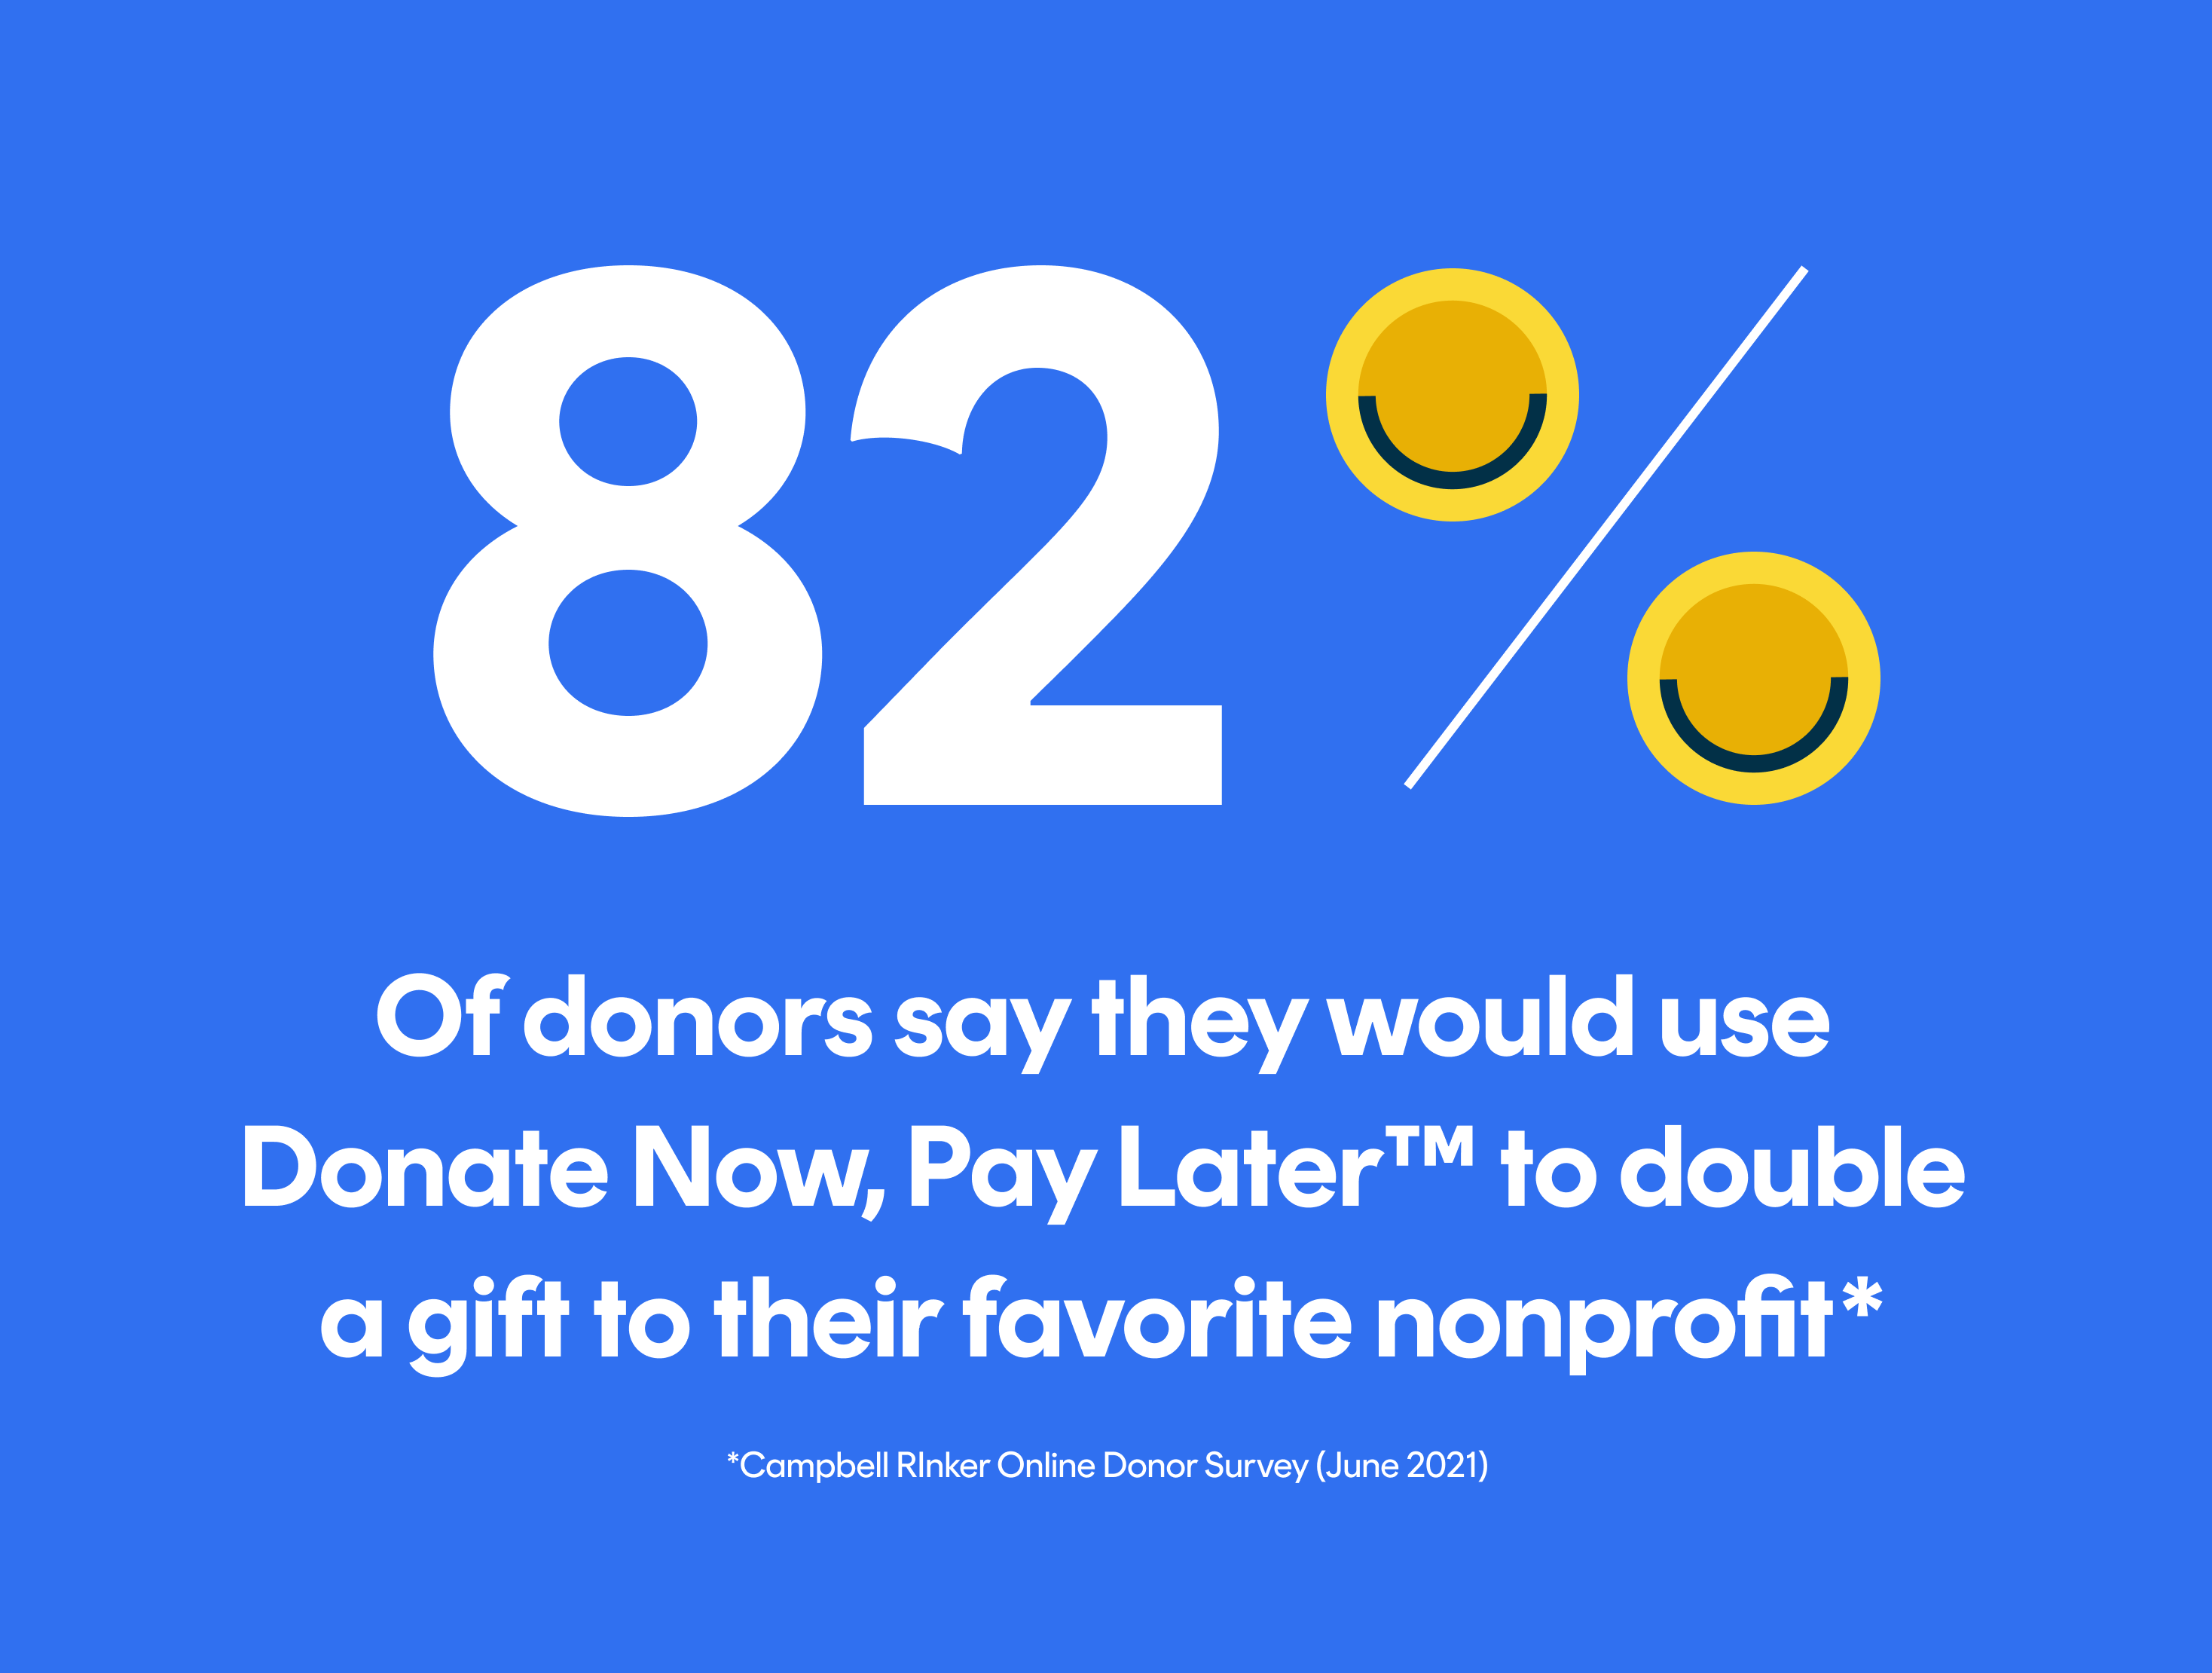 More donors will give more with Donate Now, Pay Later